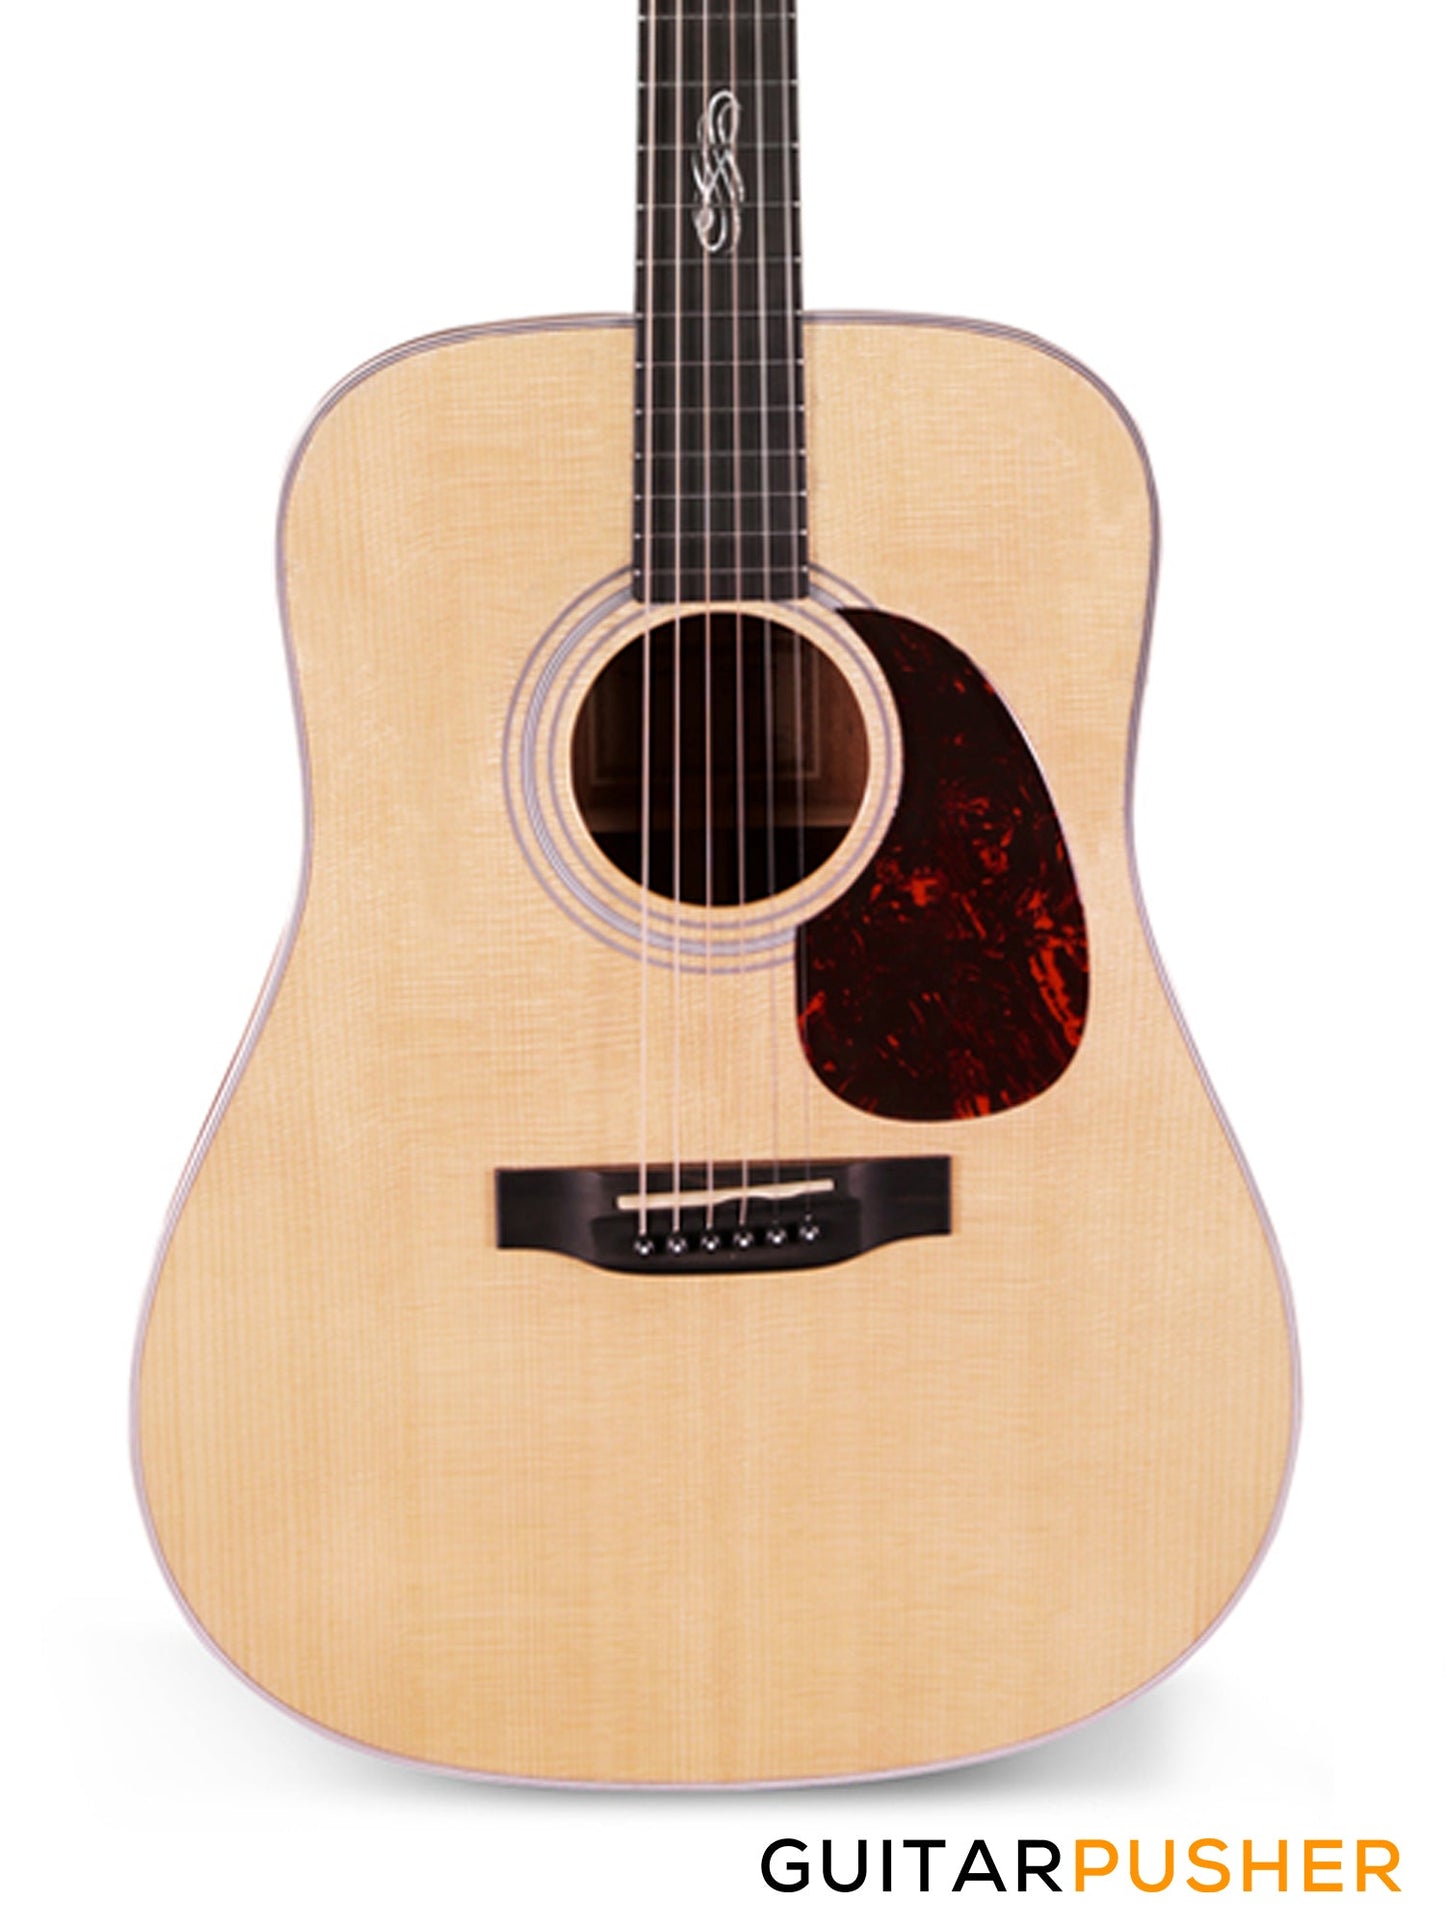 Tyma TD-15E All-Solid Sitka Spruce Top Dreadnought Acoustic-Electric Guitar